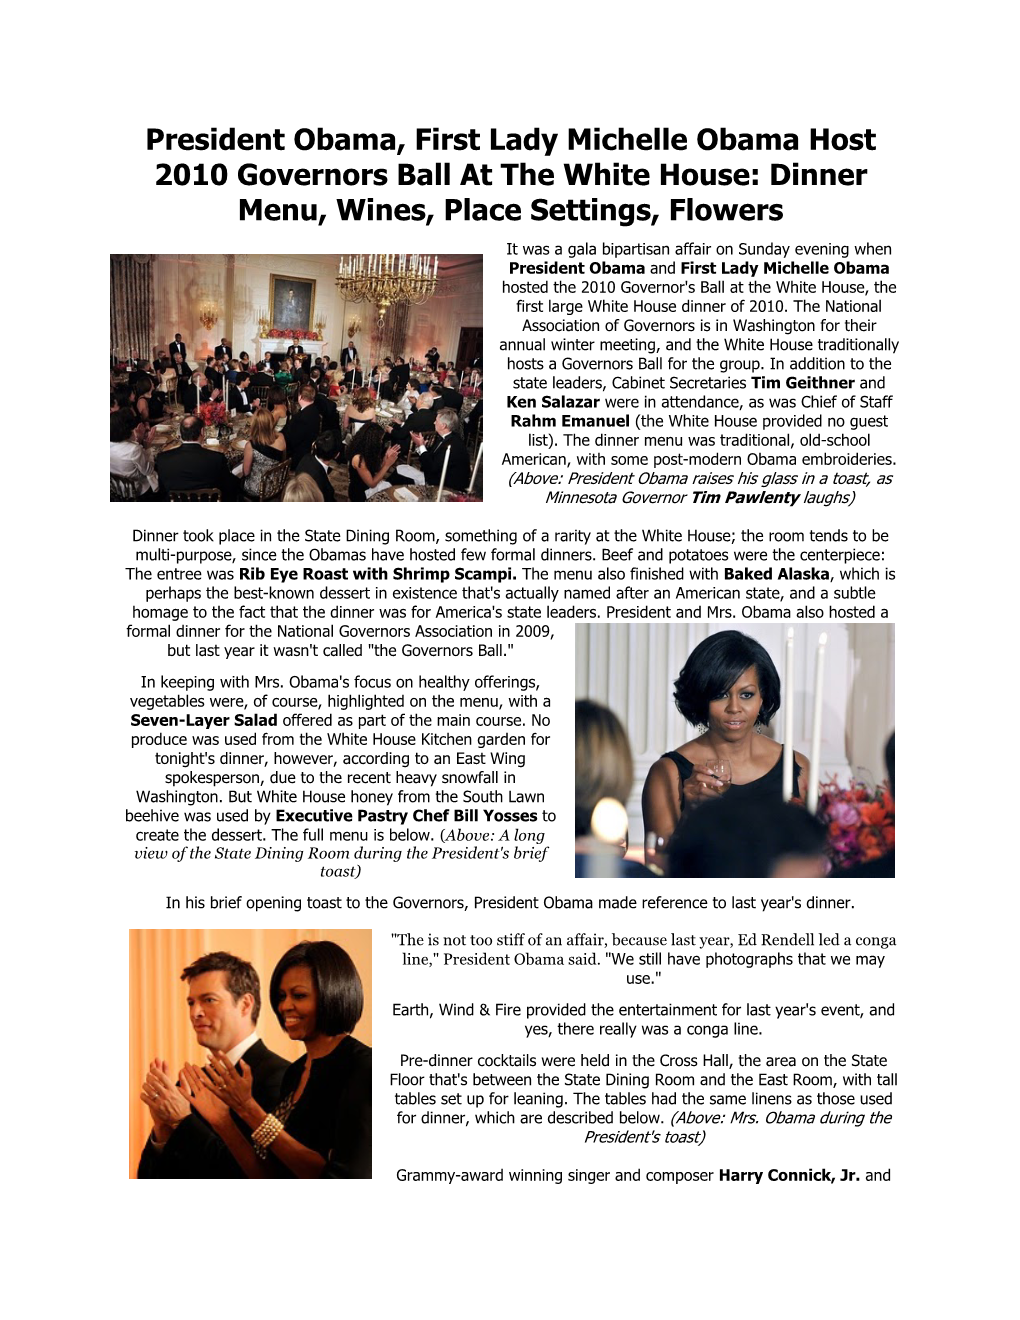 President Obama, First Lady Michelle Obama Host 2010 Governors Ball